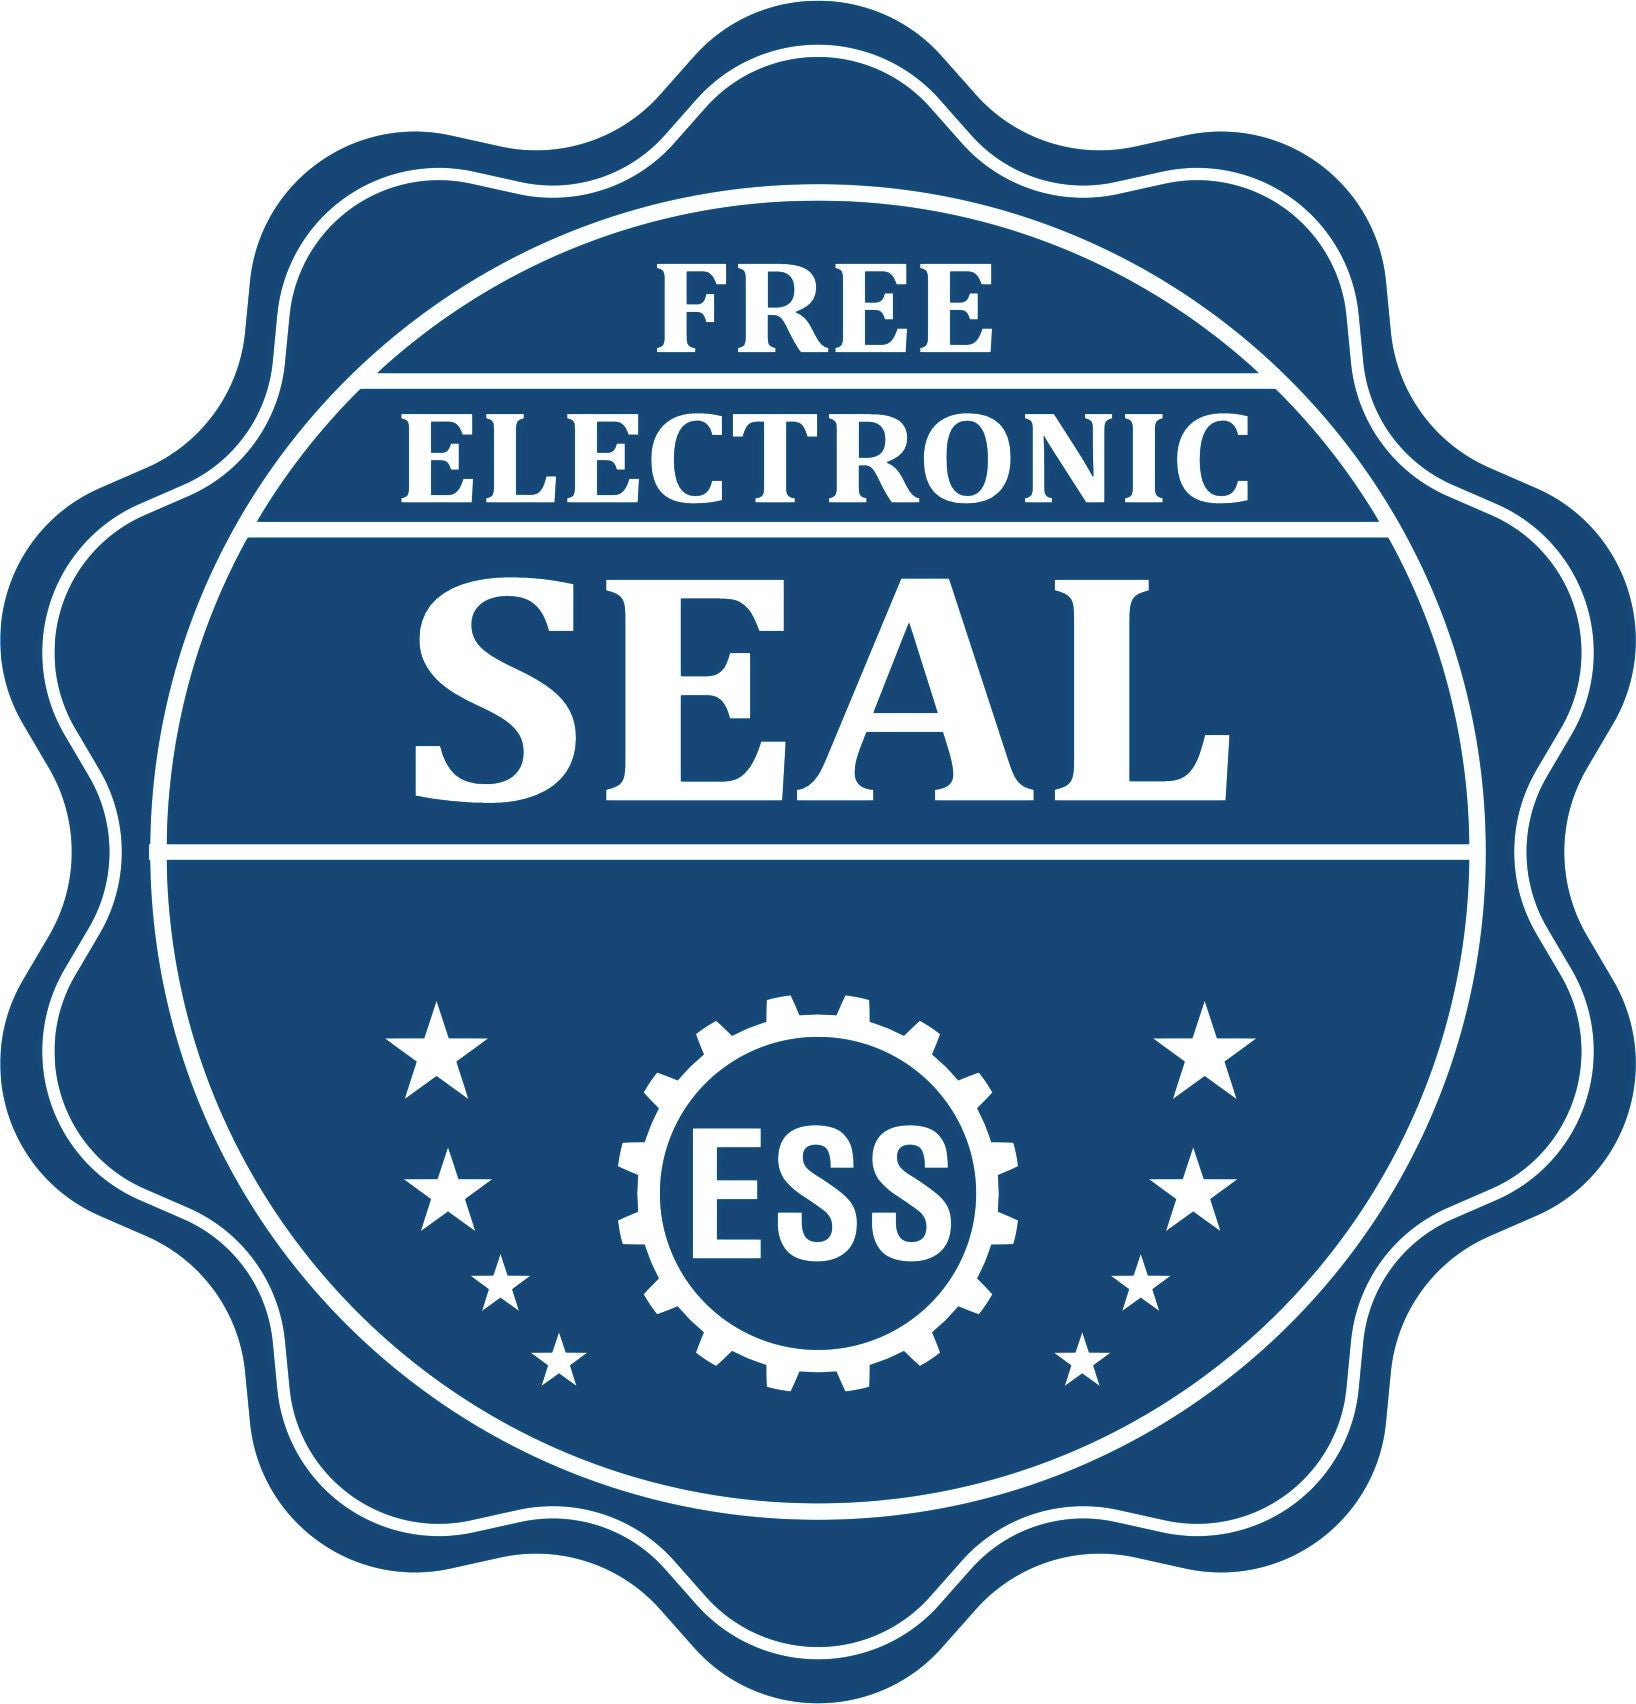 A badge showing a free electronic seal for the Slim Pre-Inked State Seal Notary Stamp for Kentucky with stars and the ESS gear on the emblem.